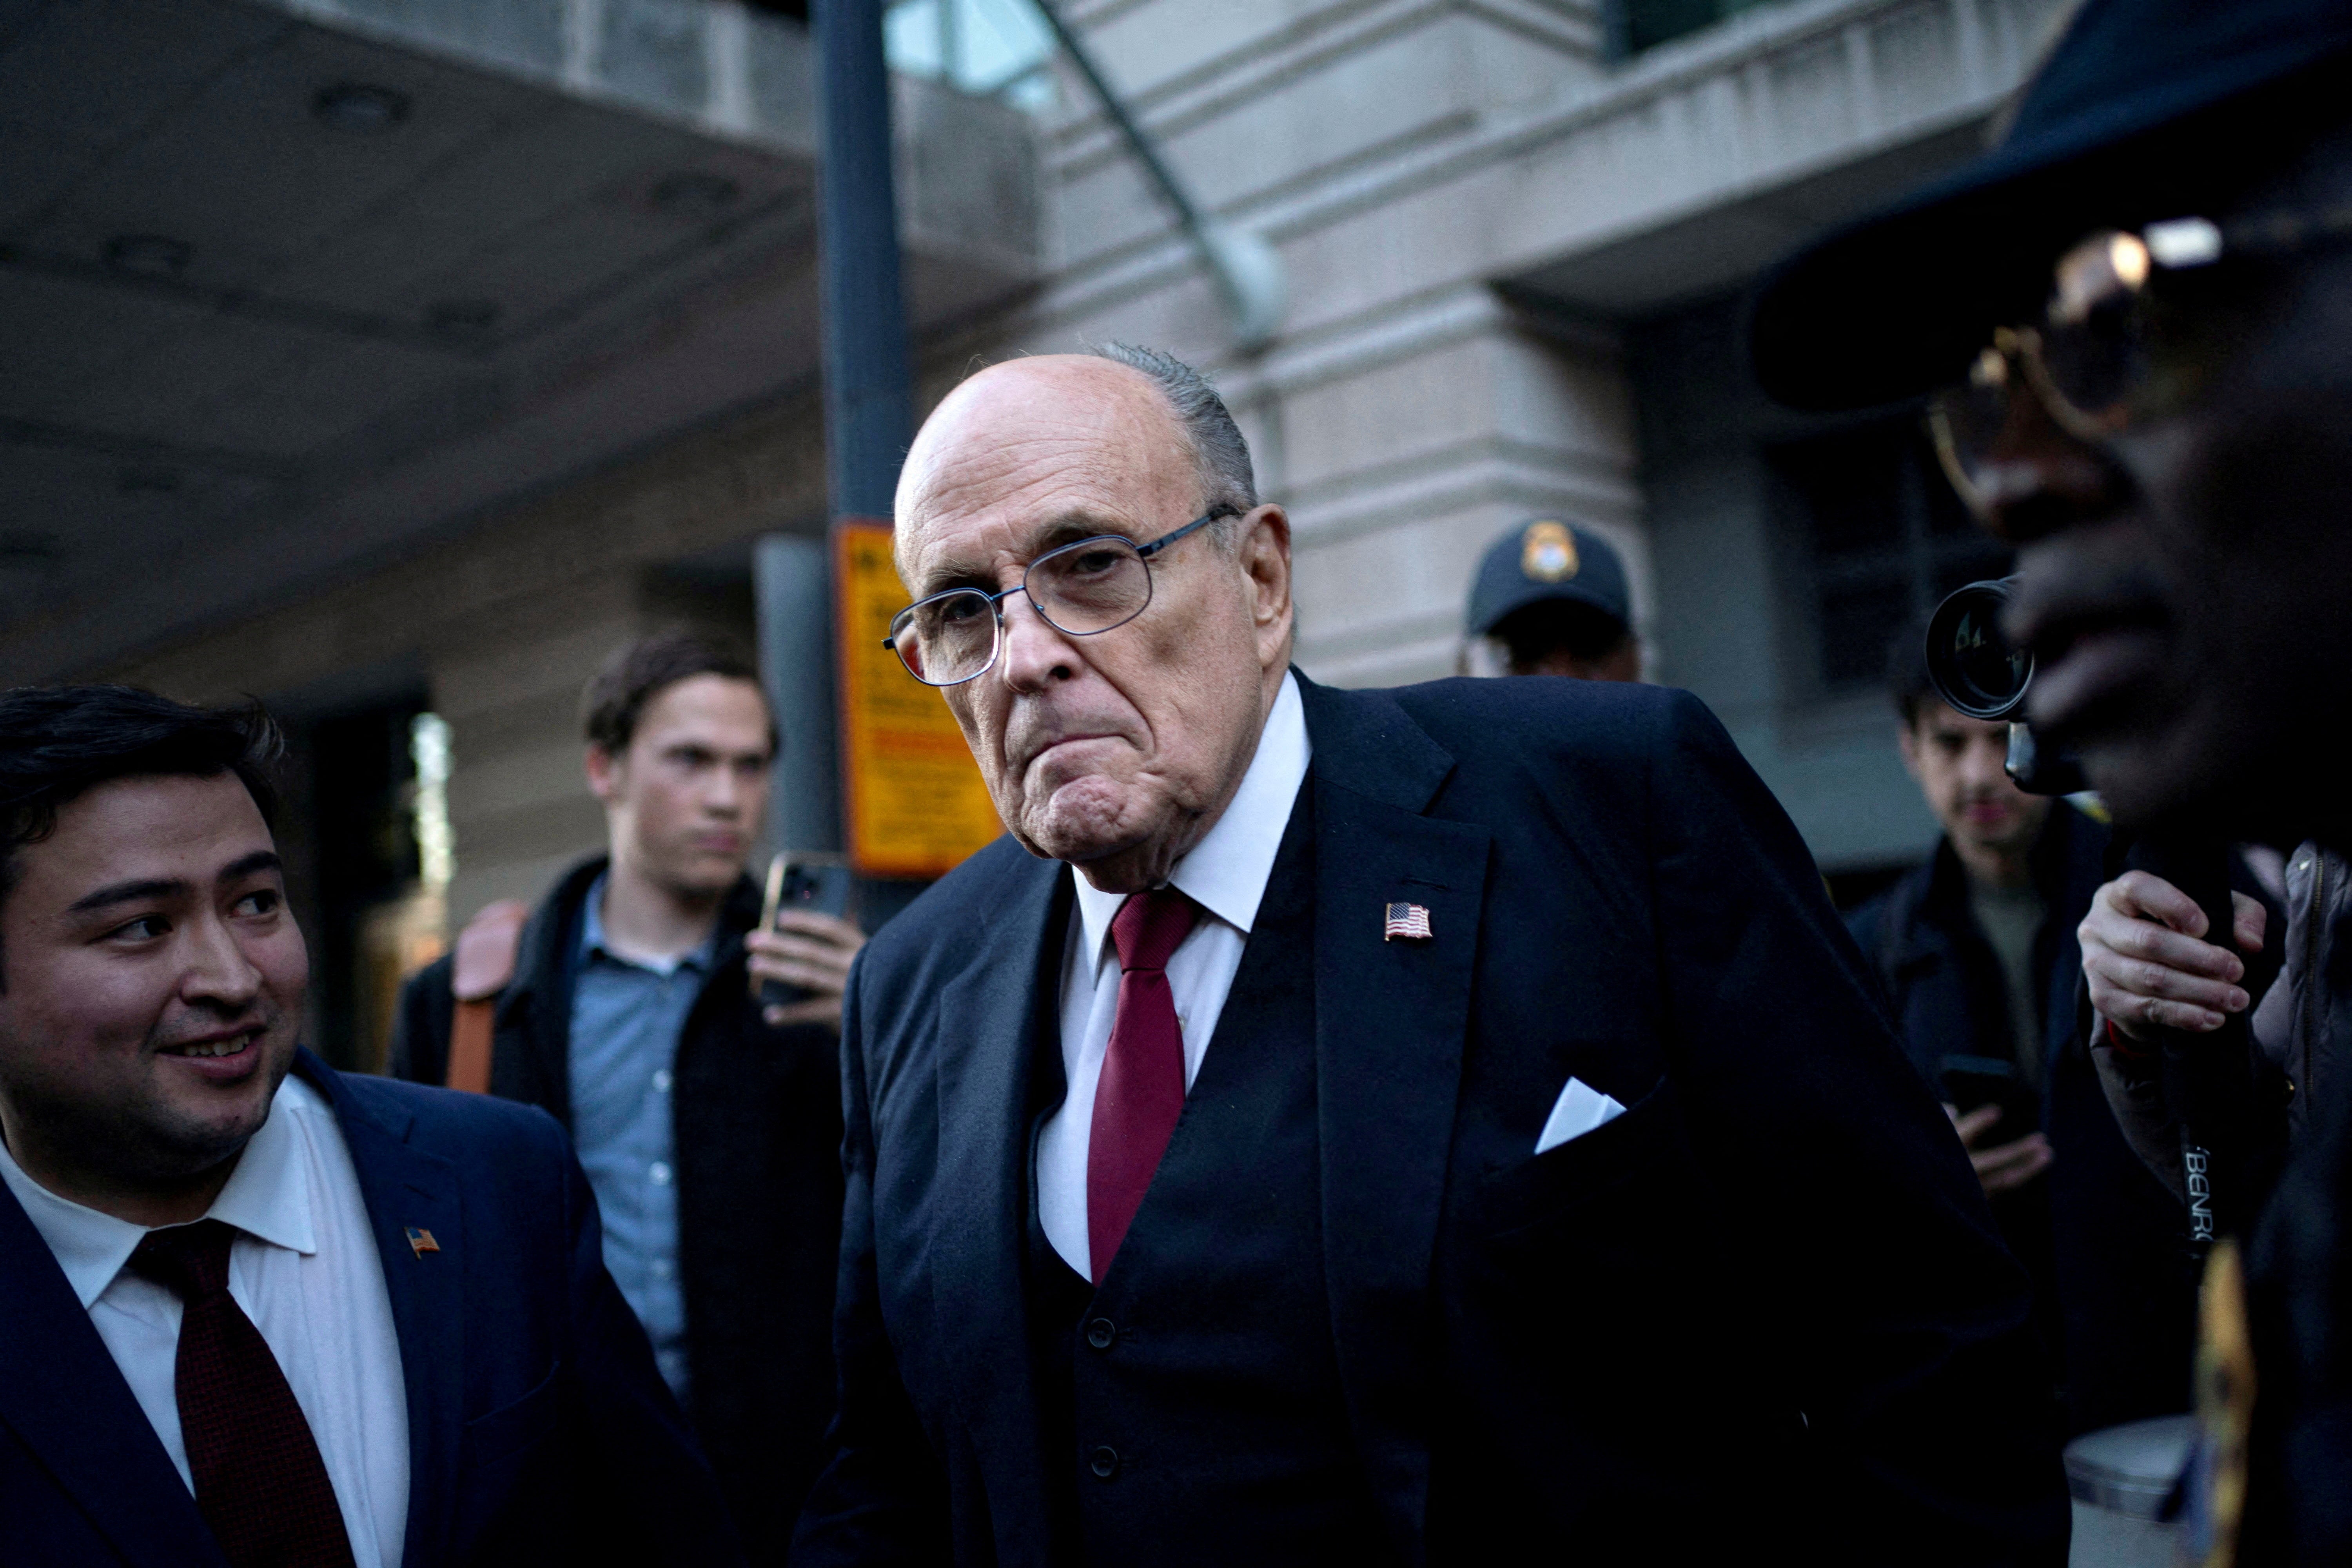 Rudy Giuliani, pictured leaving the U.S. District Courthouse after he was ordered to pay $148m in a defamation case, has since filed for bankruptcy